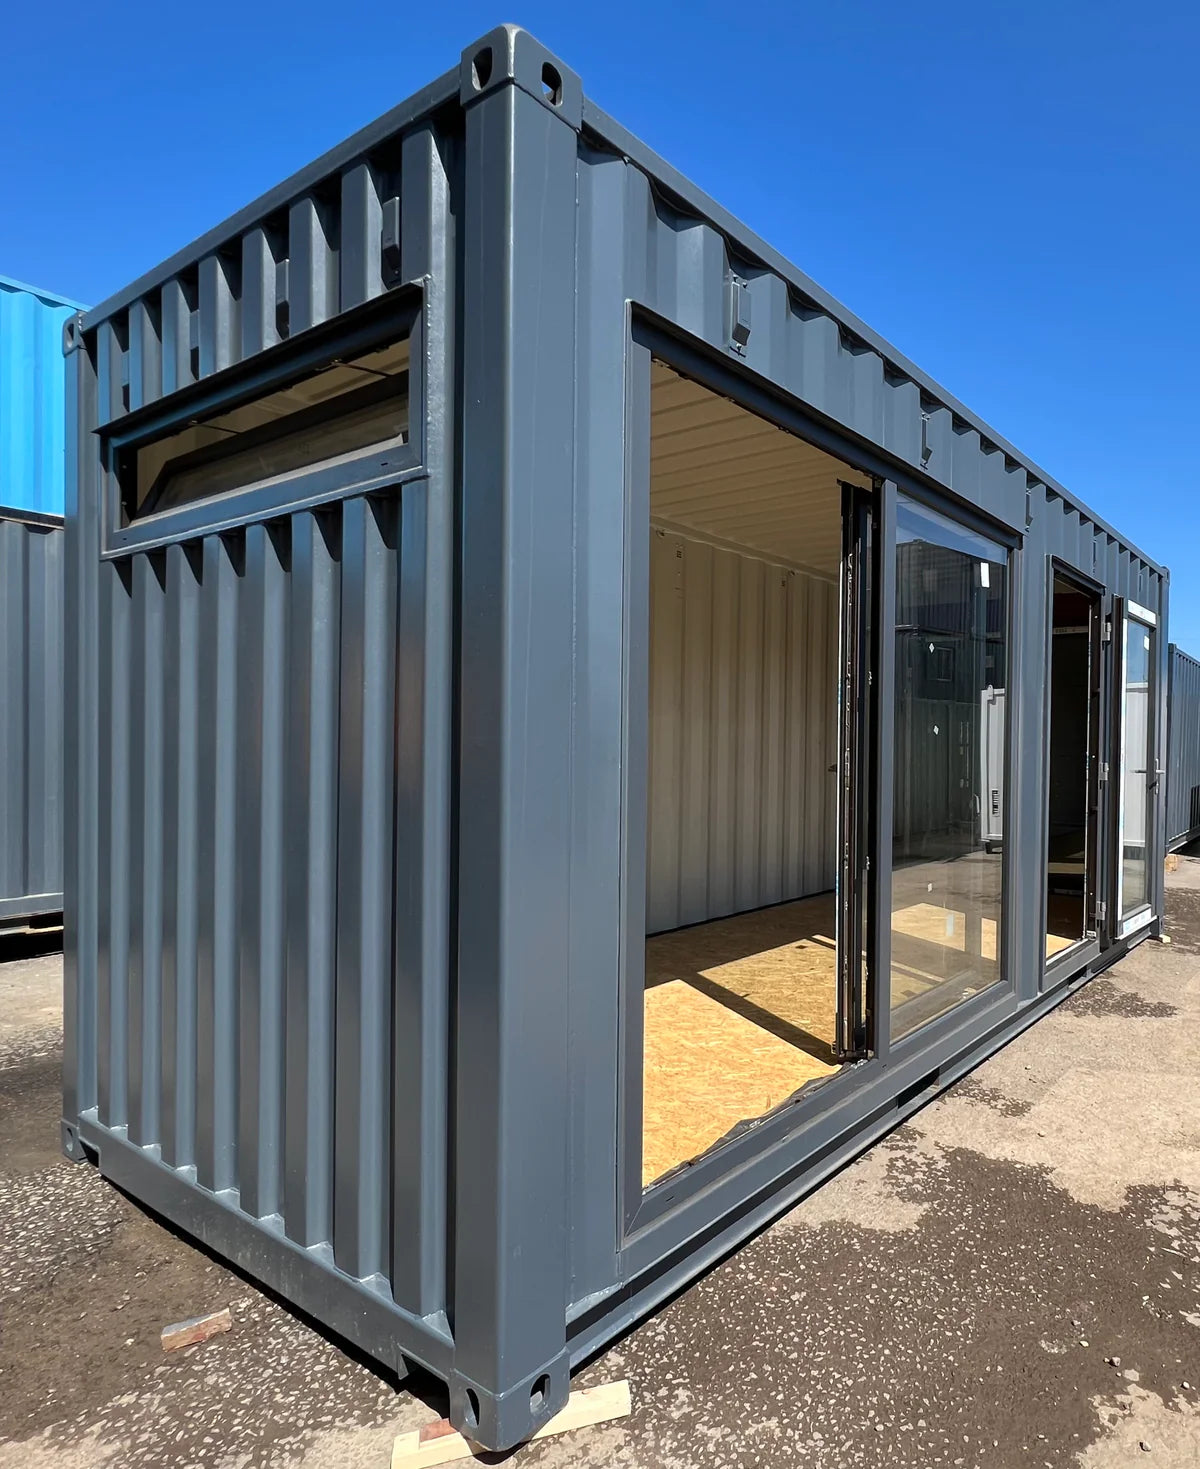 | 20x8ft | CUSTOM SHIPPING CONTAINER CONVERSION | Portable Building